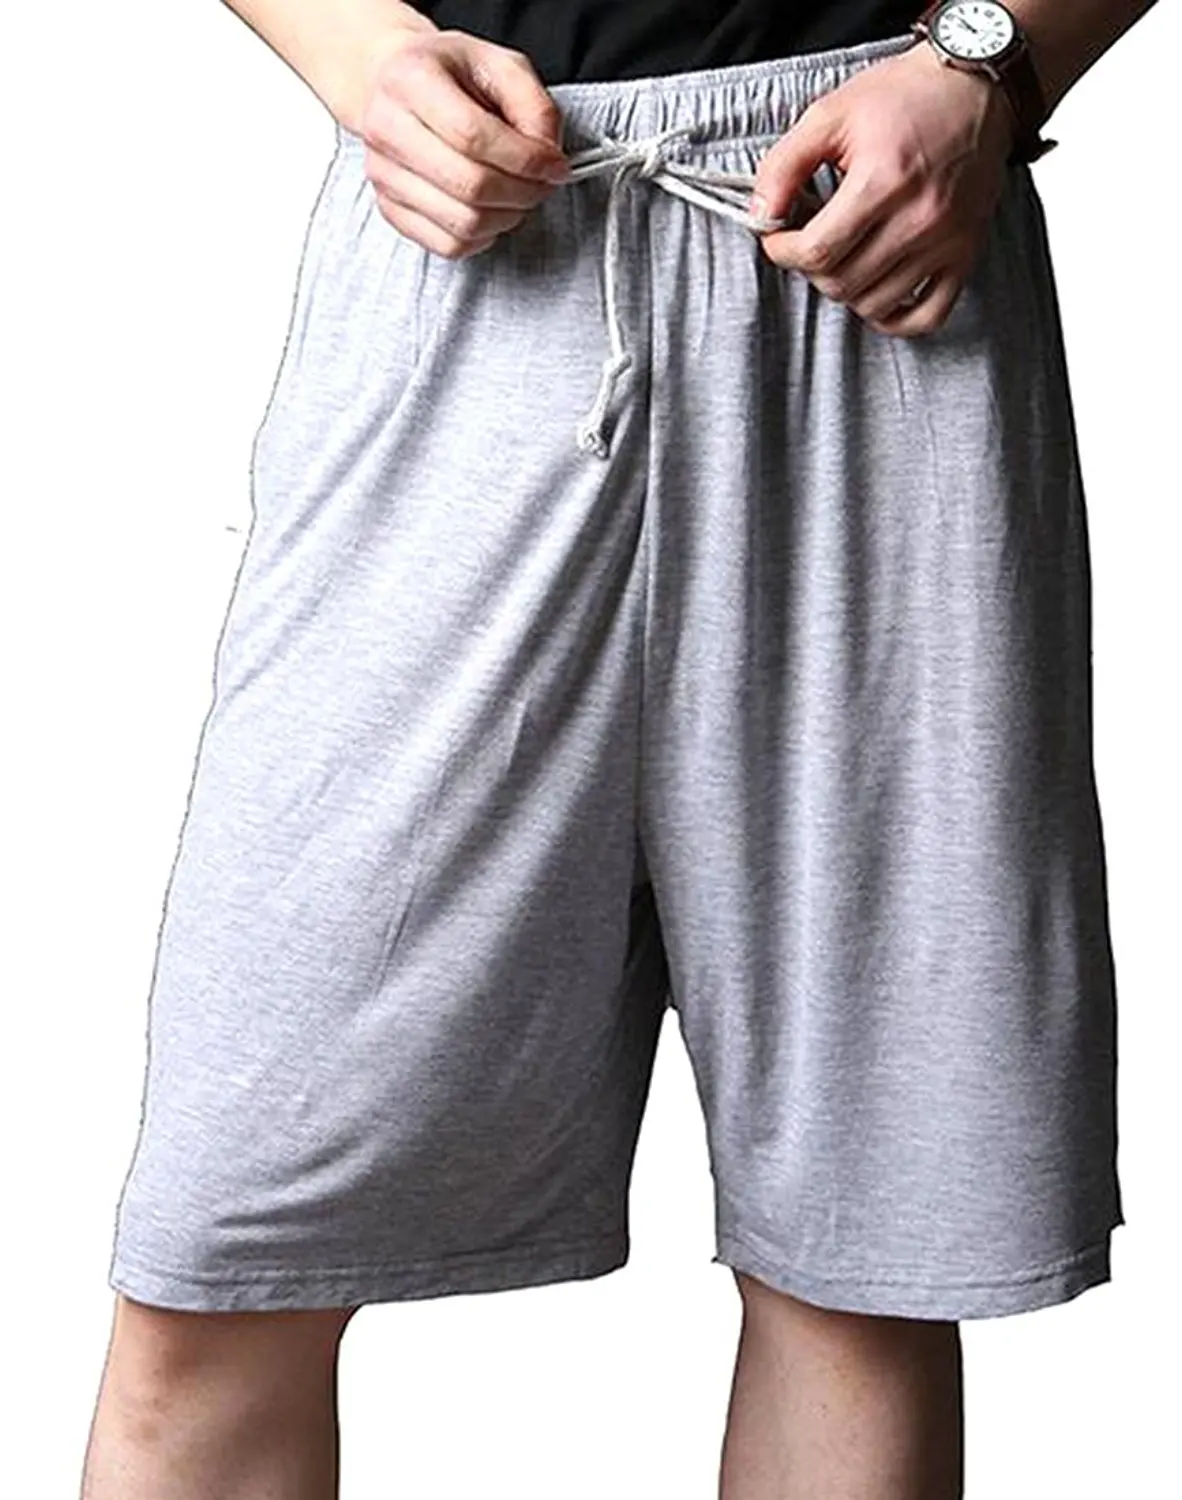 Cheap Baggy Boxers, find Baggy Boxers deals on line at Alibaba.com